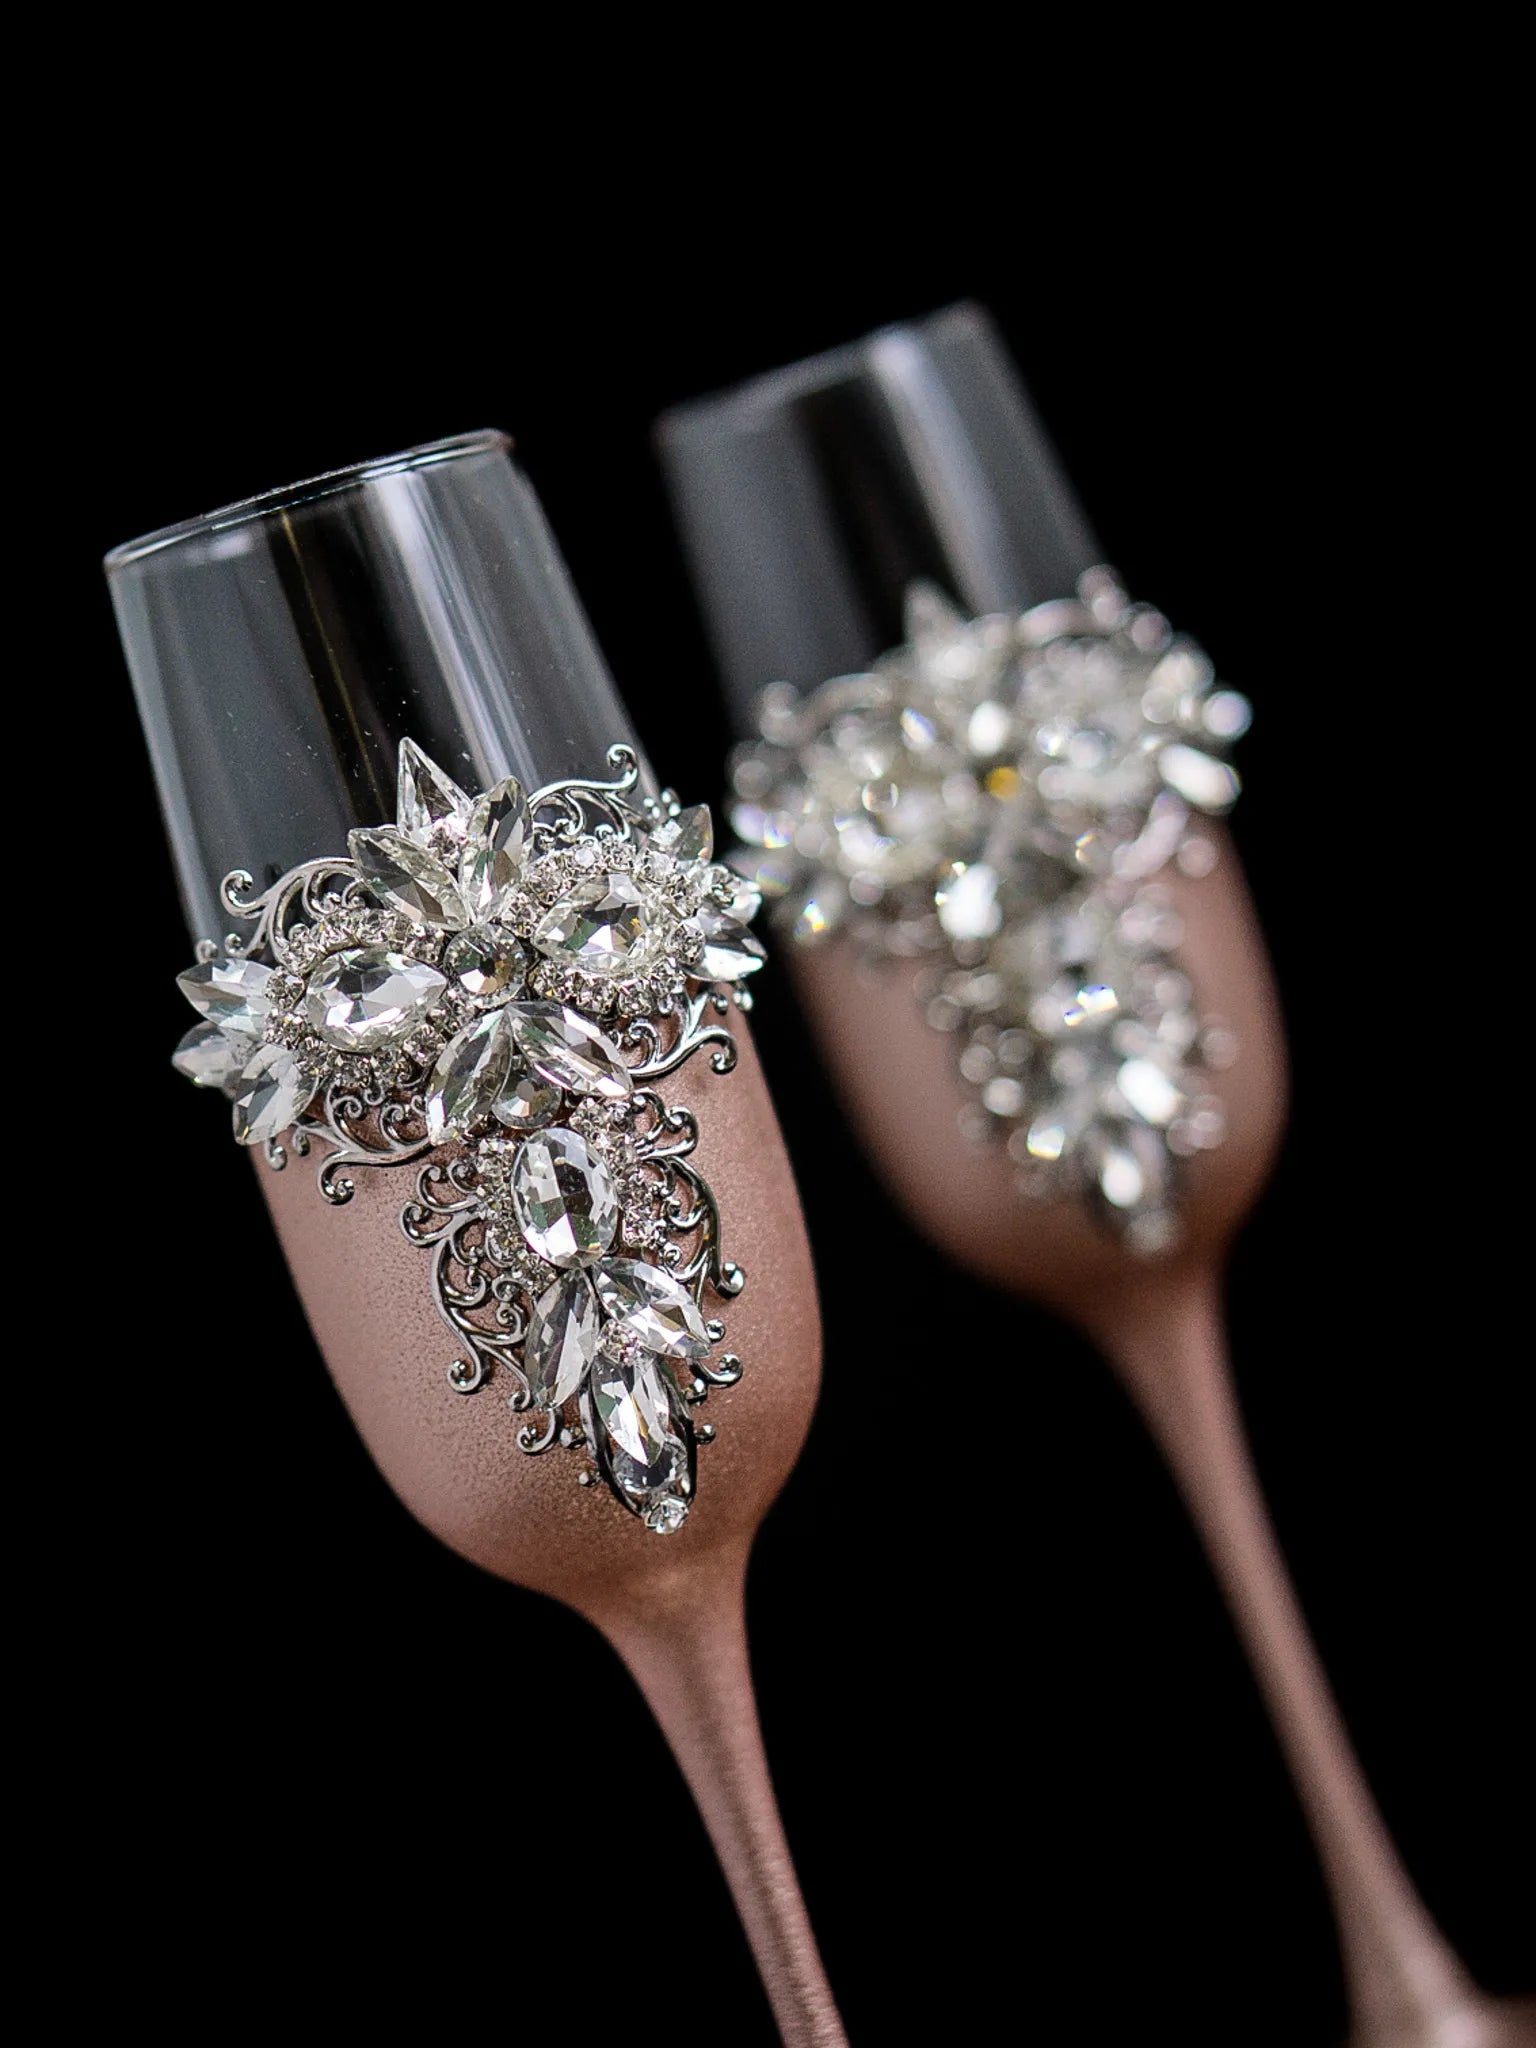 Elegant champagne flutes with silver-colored crystals